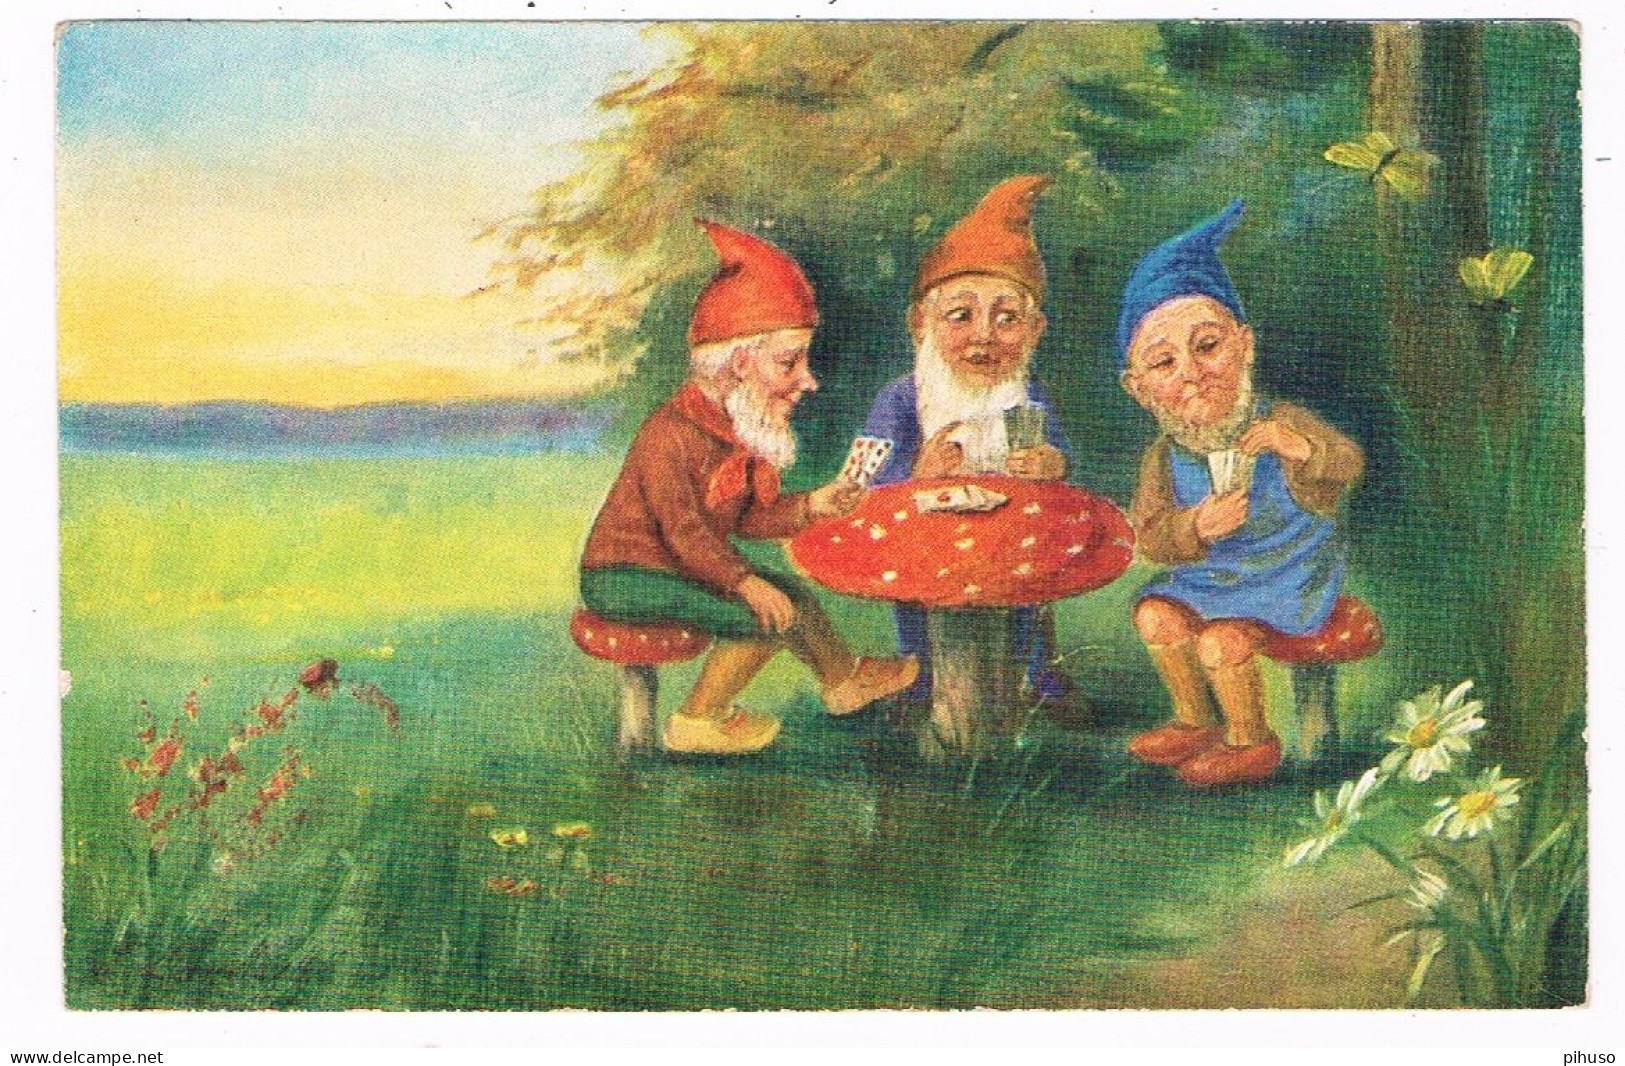 KAB-49  3 DWARFS Are Playing Cards On A MUSHROOM - Fairy Tales, Popular Stories & Legends